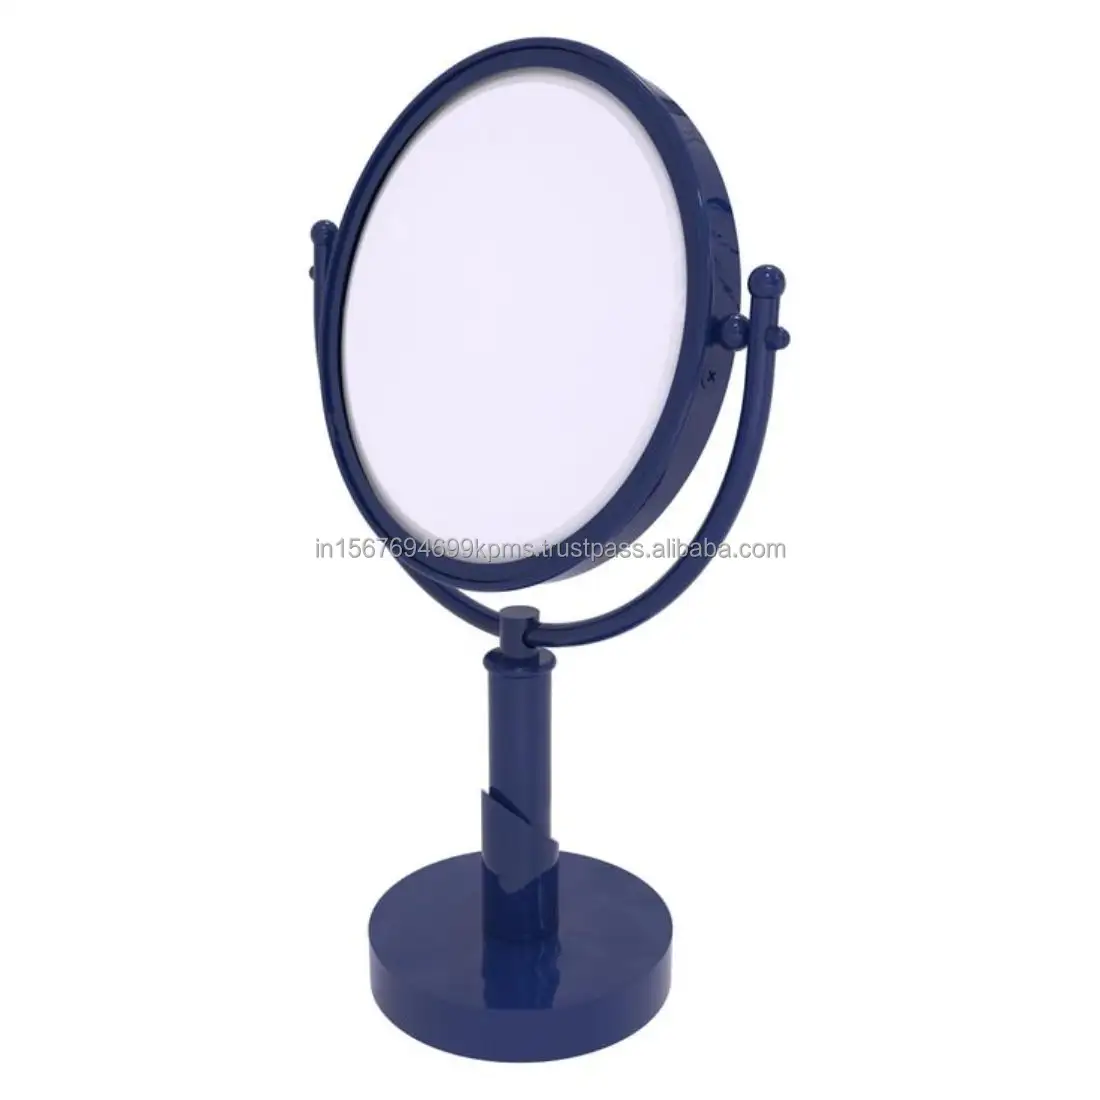 New Cosmetic Collection Blue Finished Vanity Mirror Desk Decorative Accent Mirror With Stand Amazing Makeup Mirror For Women's